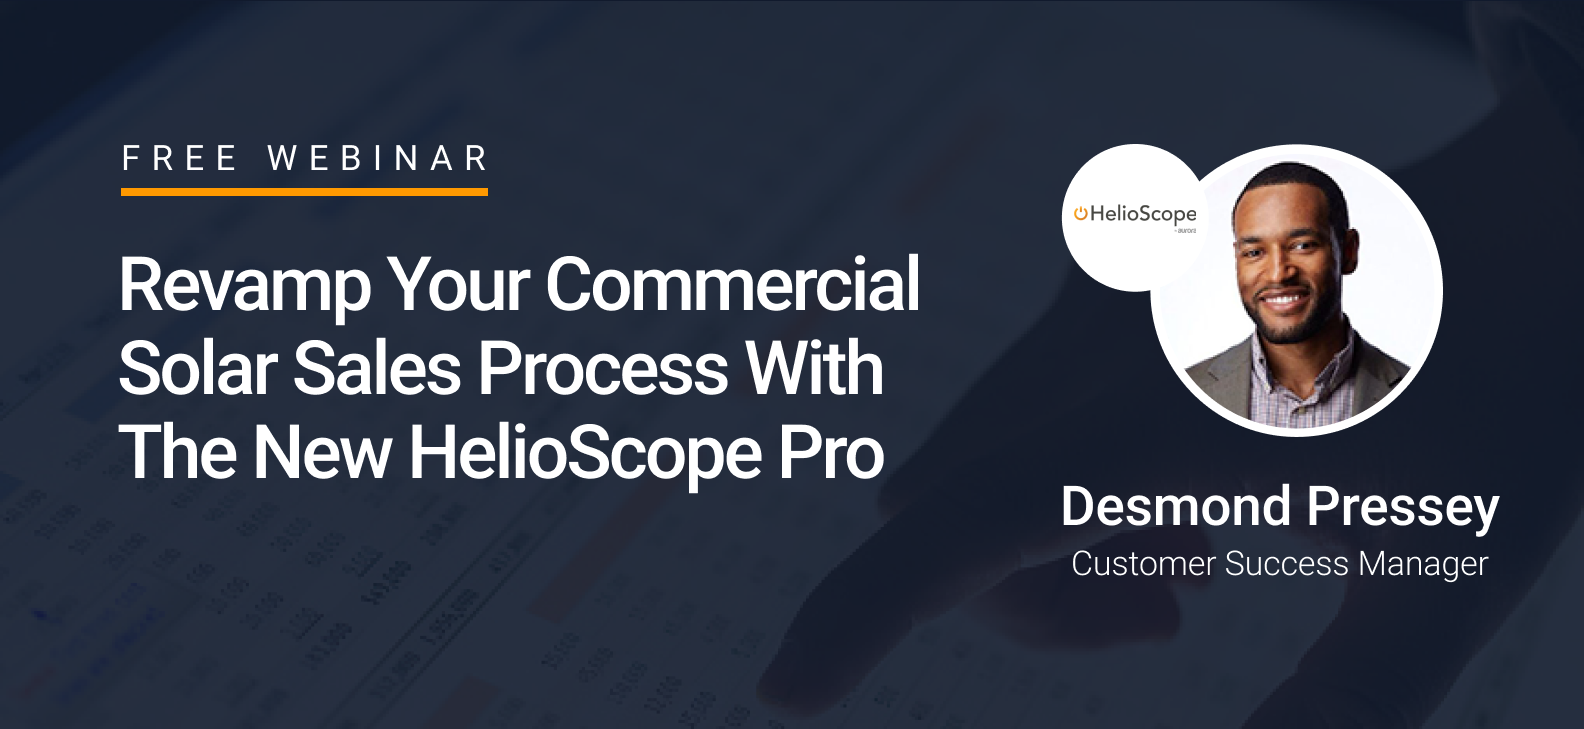 Webinar — 3 Ways to Close More Commercial Solar Deals With HelioScope Pro